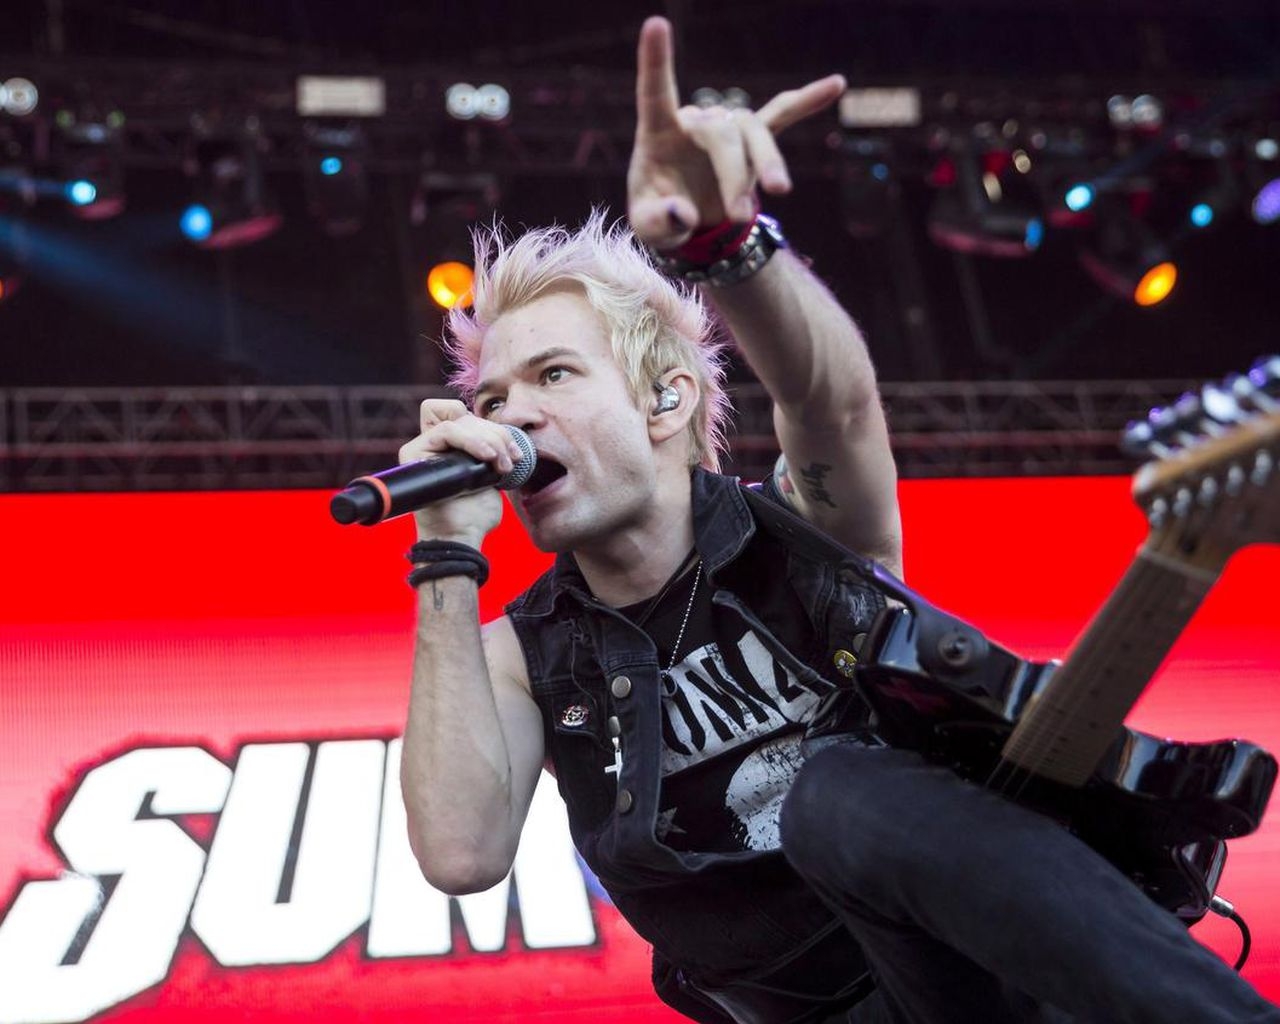 Sum 41 call it quits: 'Thank you for the last 27 years